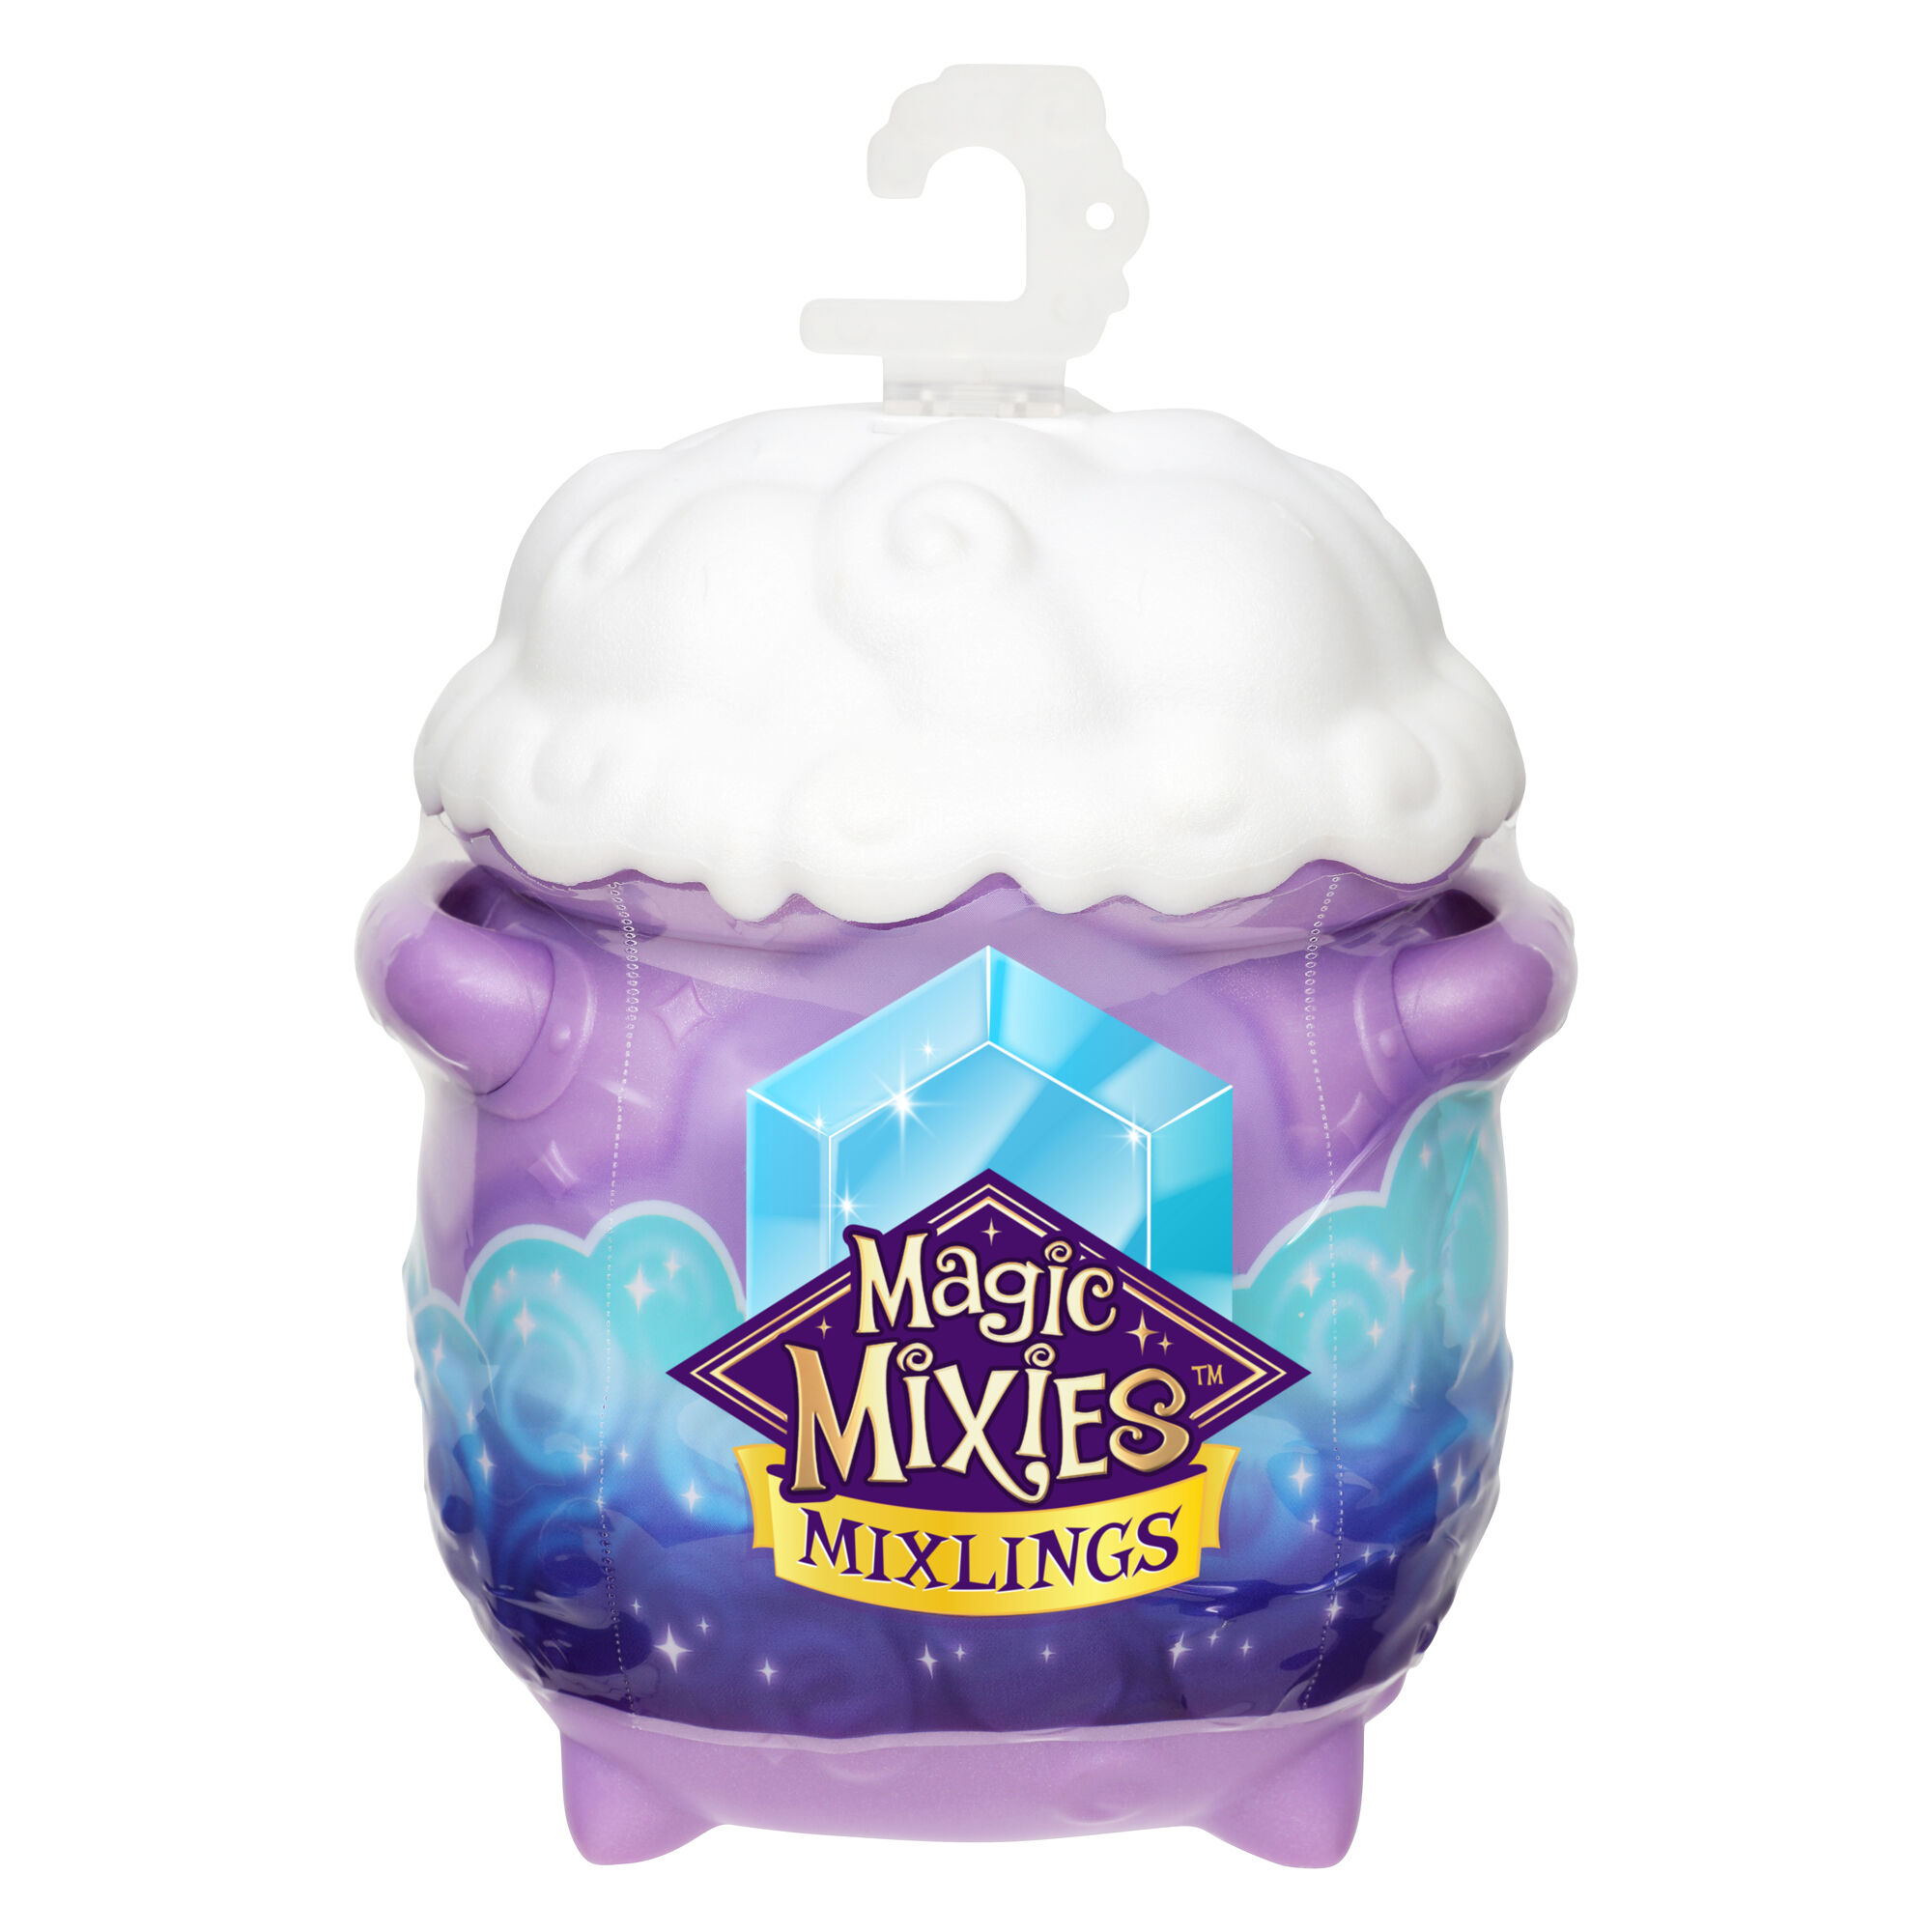 View Claires Magic Mixies Mixlings Collectors Cauldron Series 1 Blind Bag Styles May Vary information